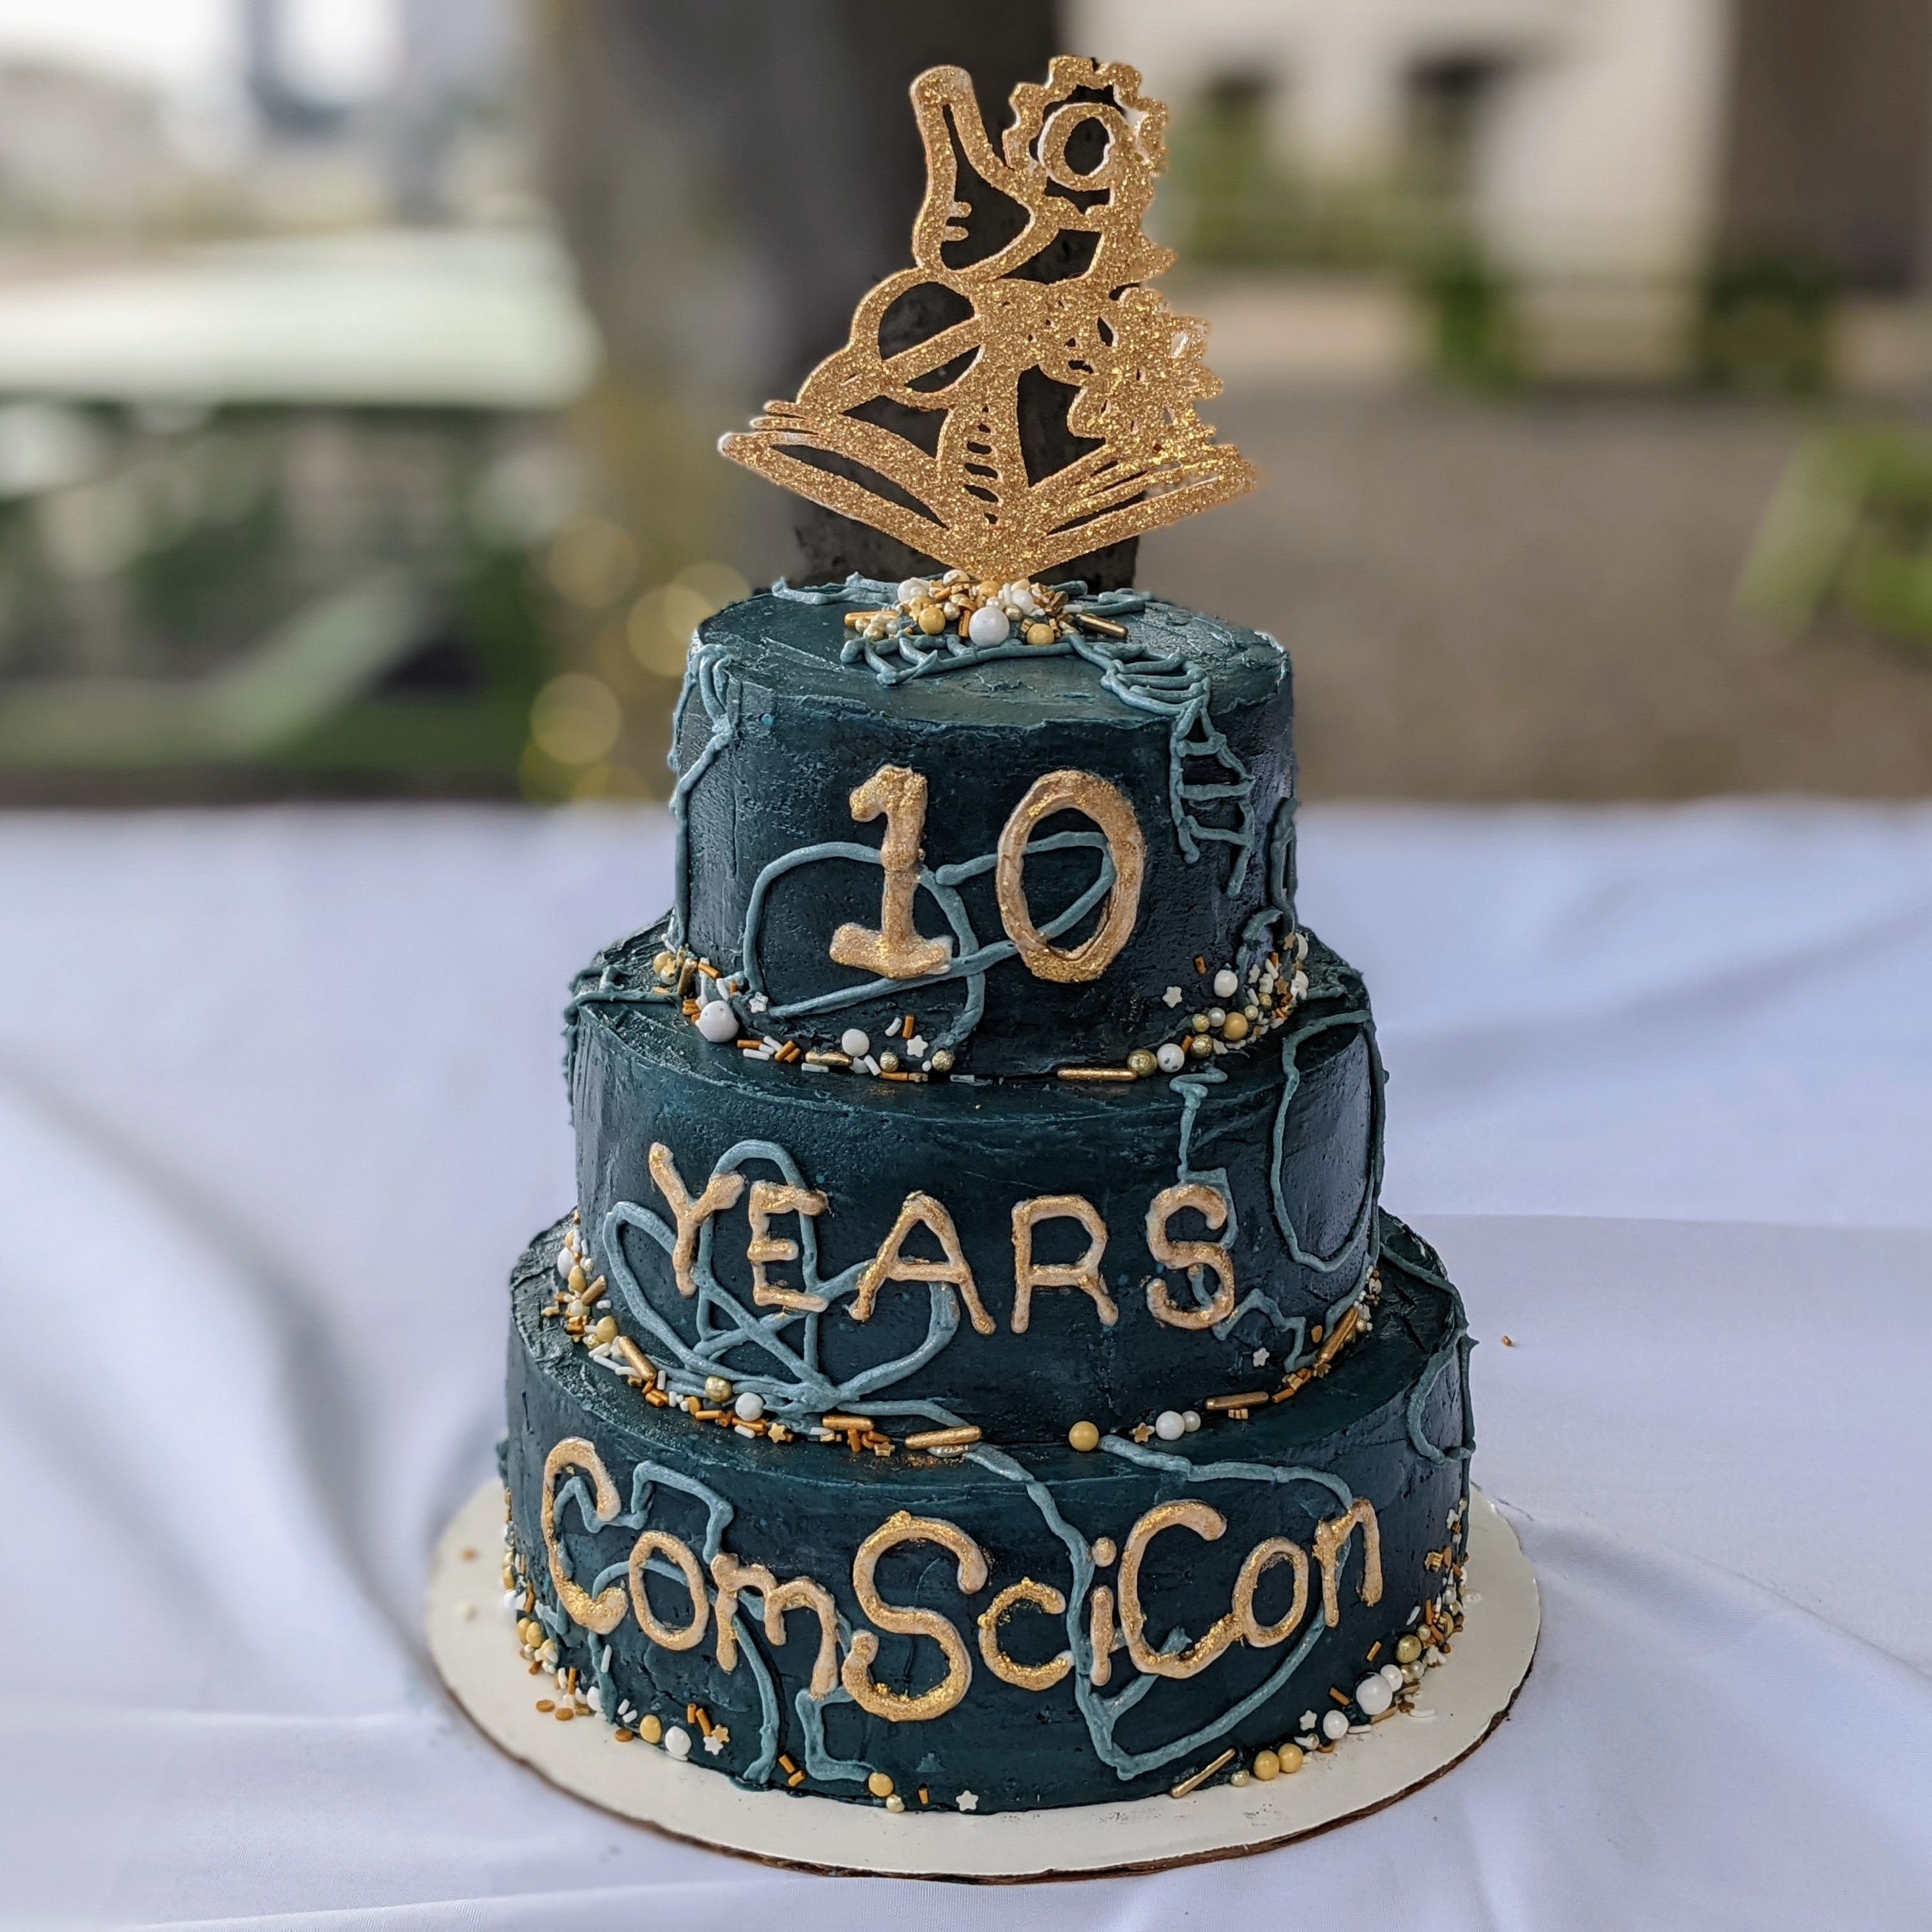 blue 3-layered cake with gold letter writing: 10 years ComSciCon